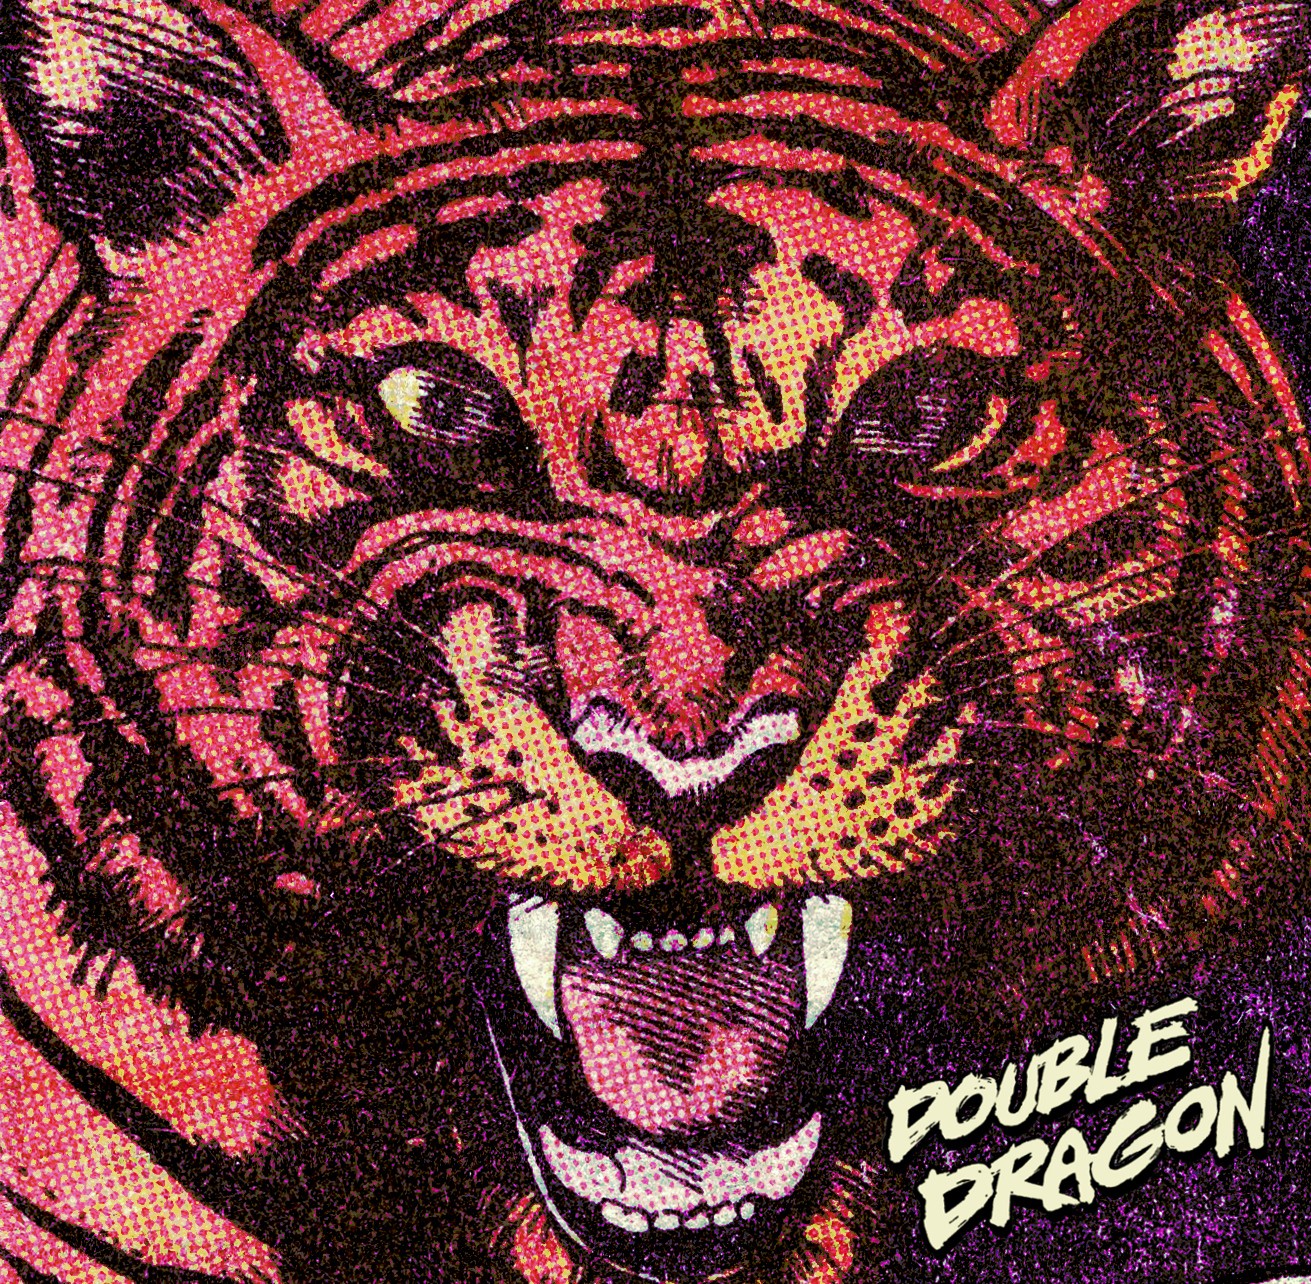 New Retro Wave Tiger Double Dragon Synthwave France 1311x1284